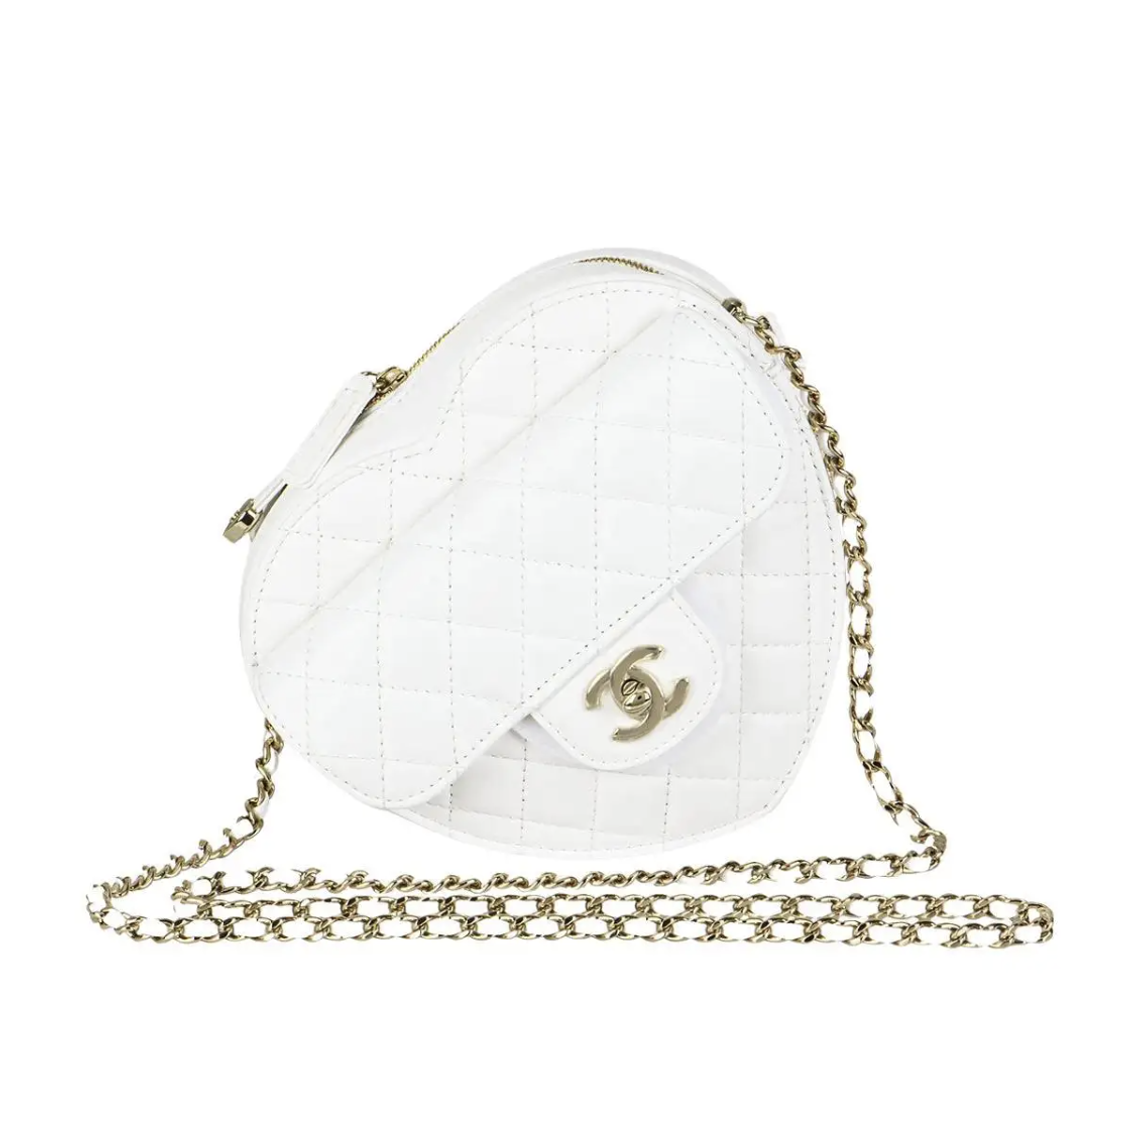 Chanel Large Heart Bag in White Leather with Gold Hardware